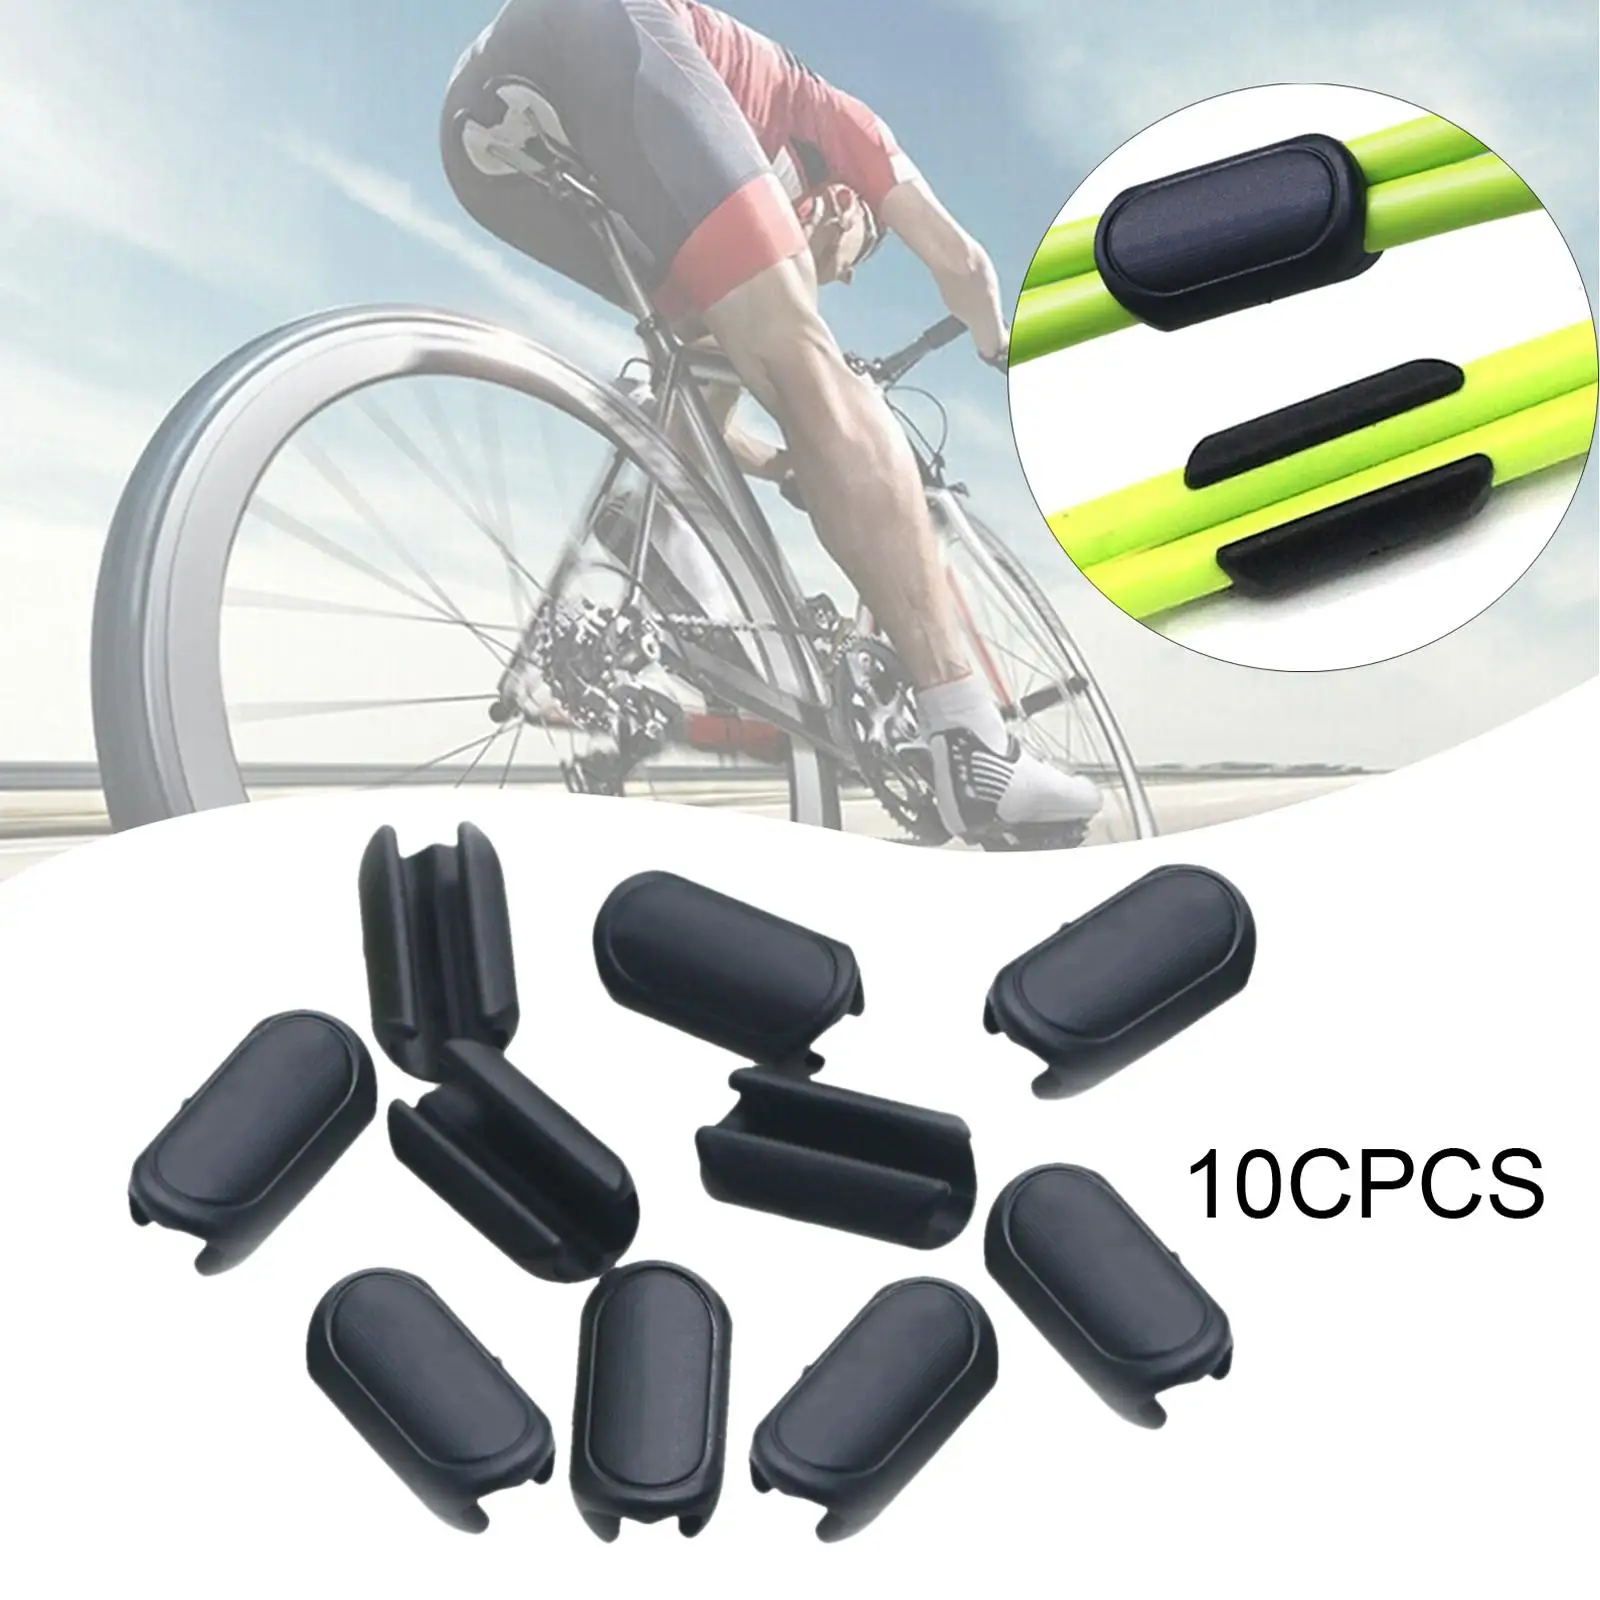 10 Pieces Bike Cable Clips Housing Tidy Clips for Fixed Gear